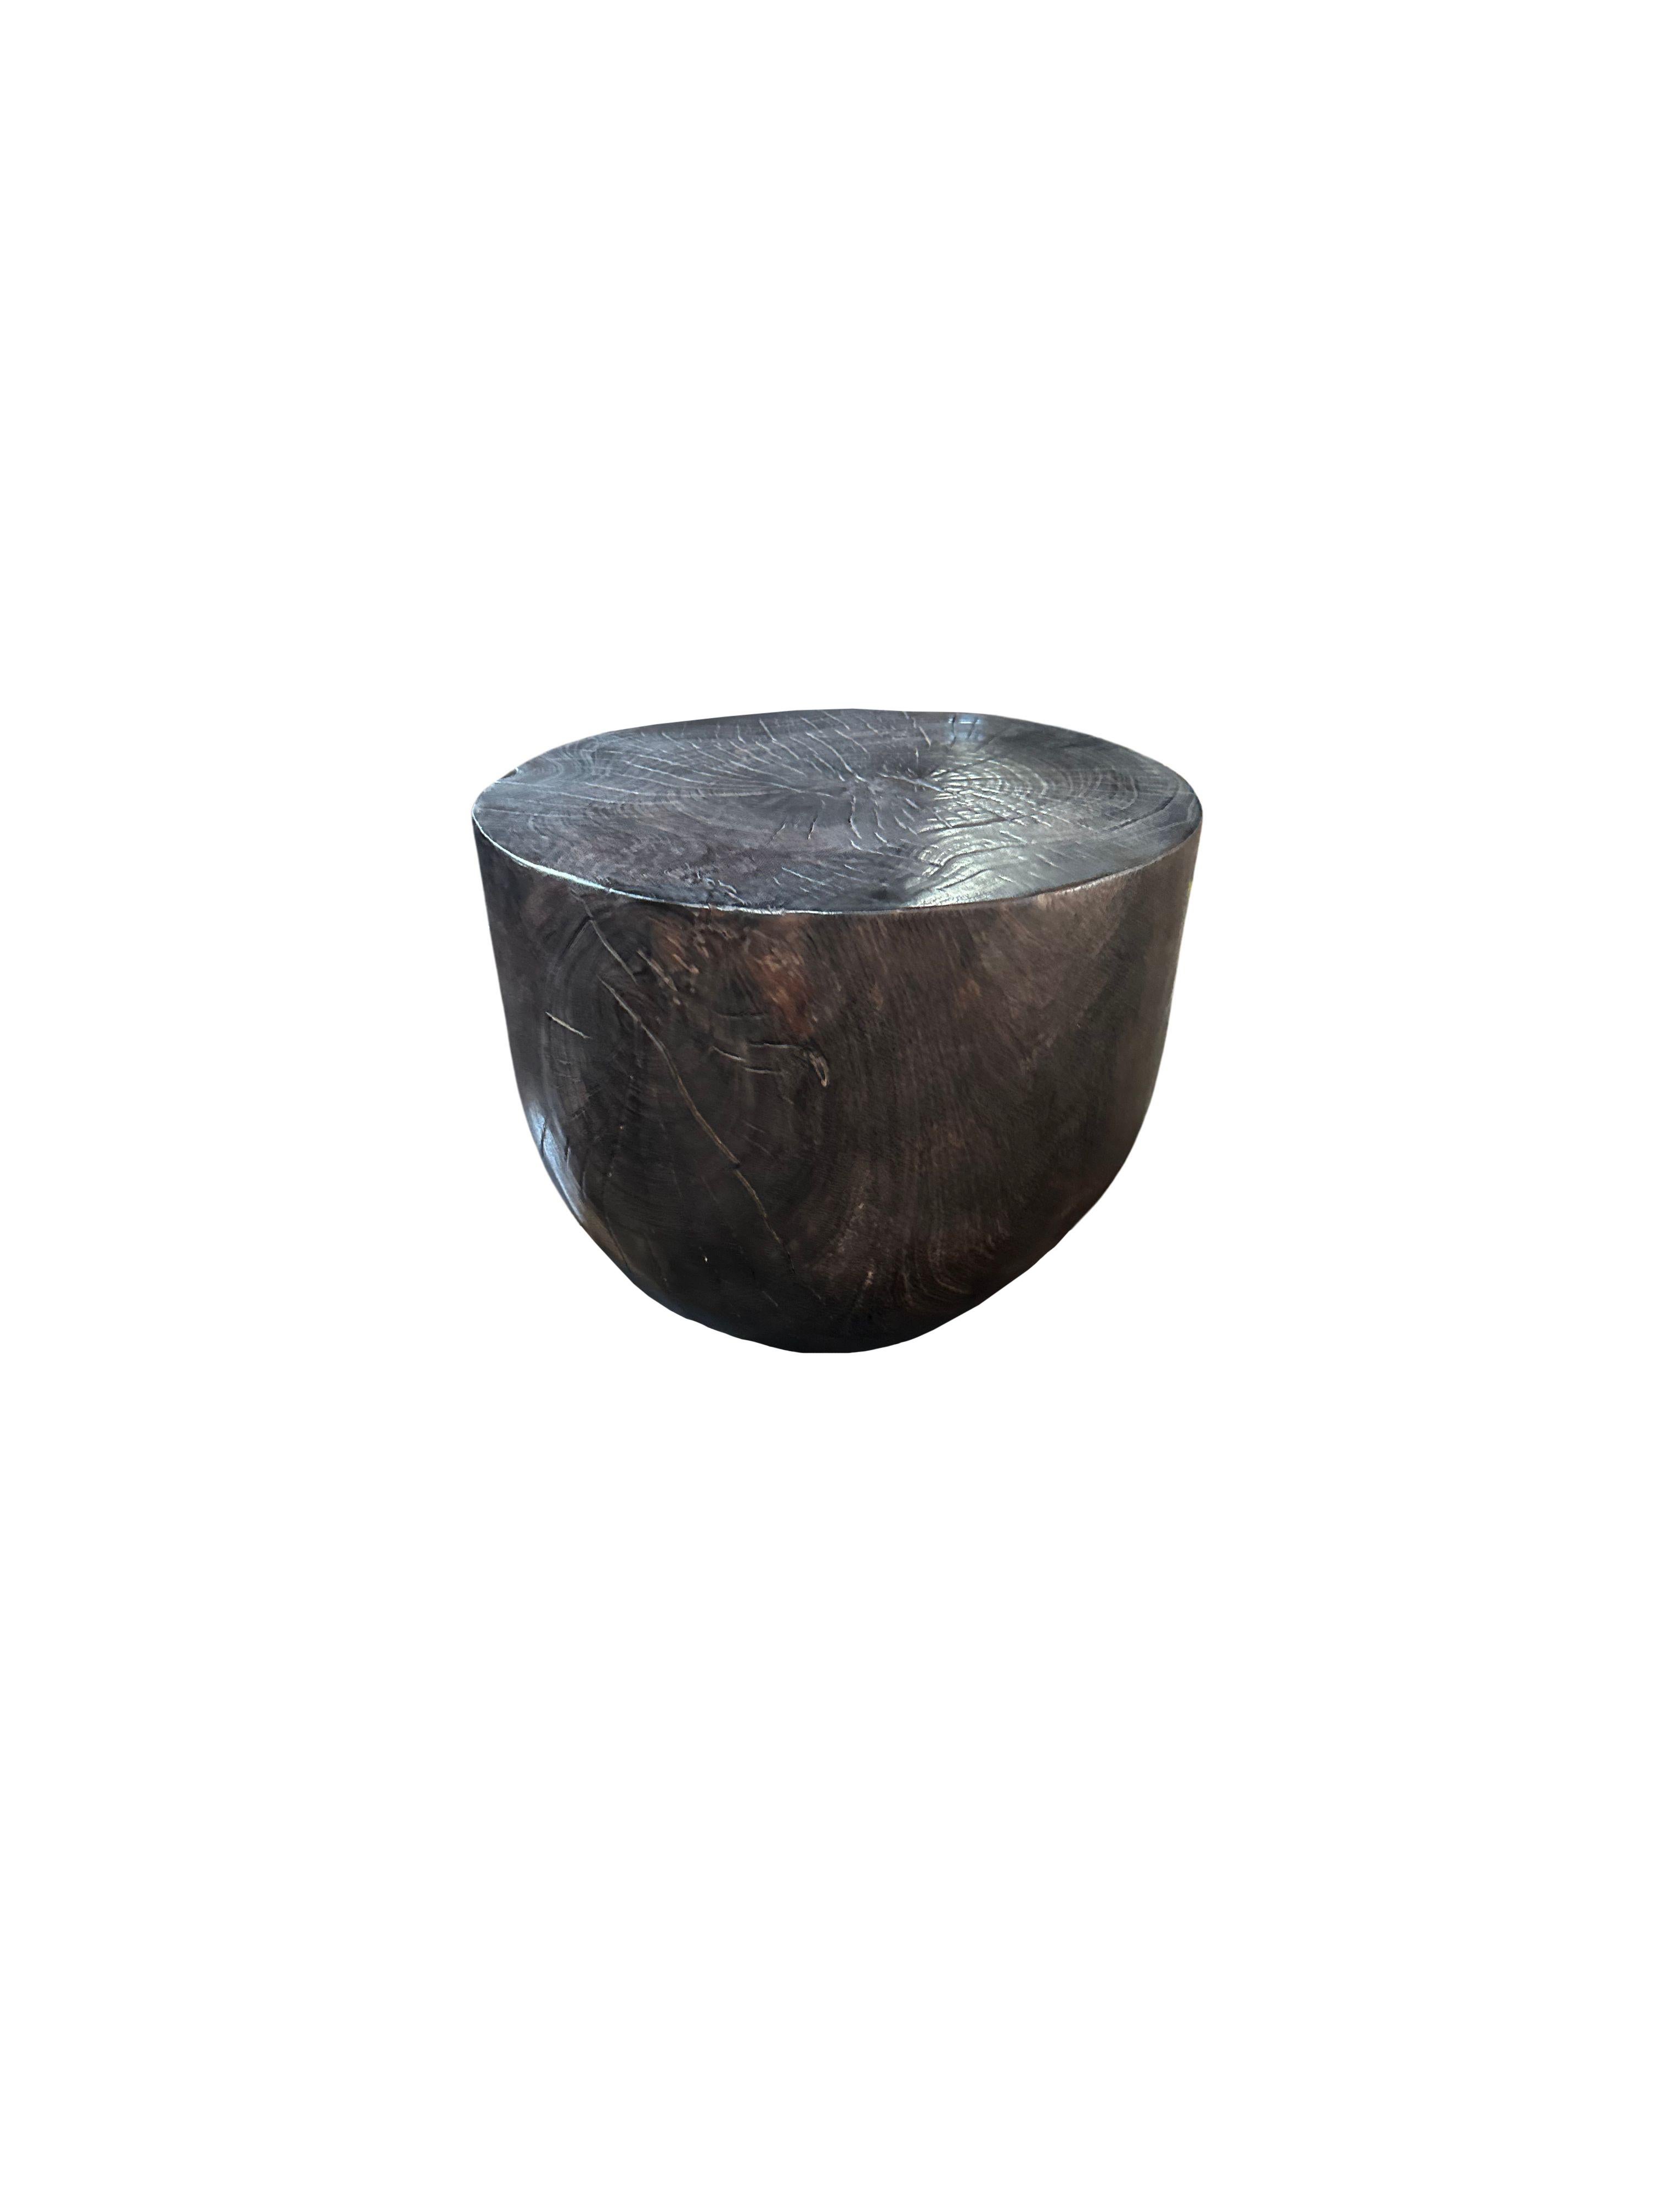 A sculptural side table crafted from solid mango wood. To achieve its dark pigment the wood was burnt several times and finished with a clear coat. The wood textures and shades present on all sides adds to its charm. 1400